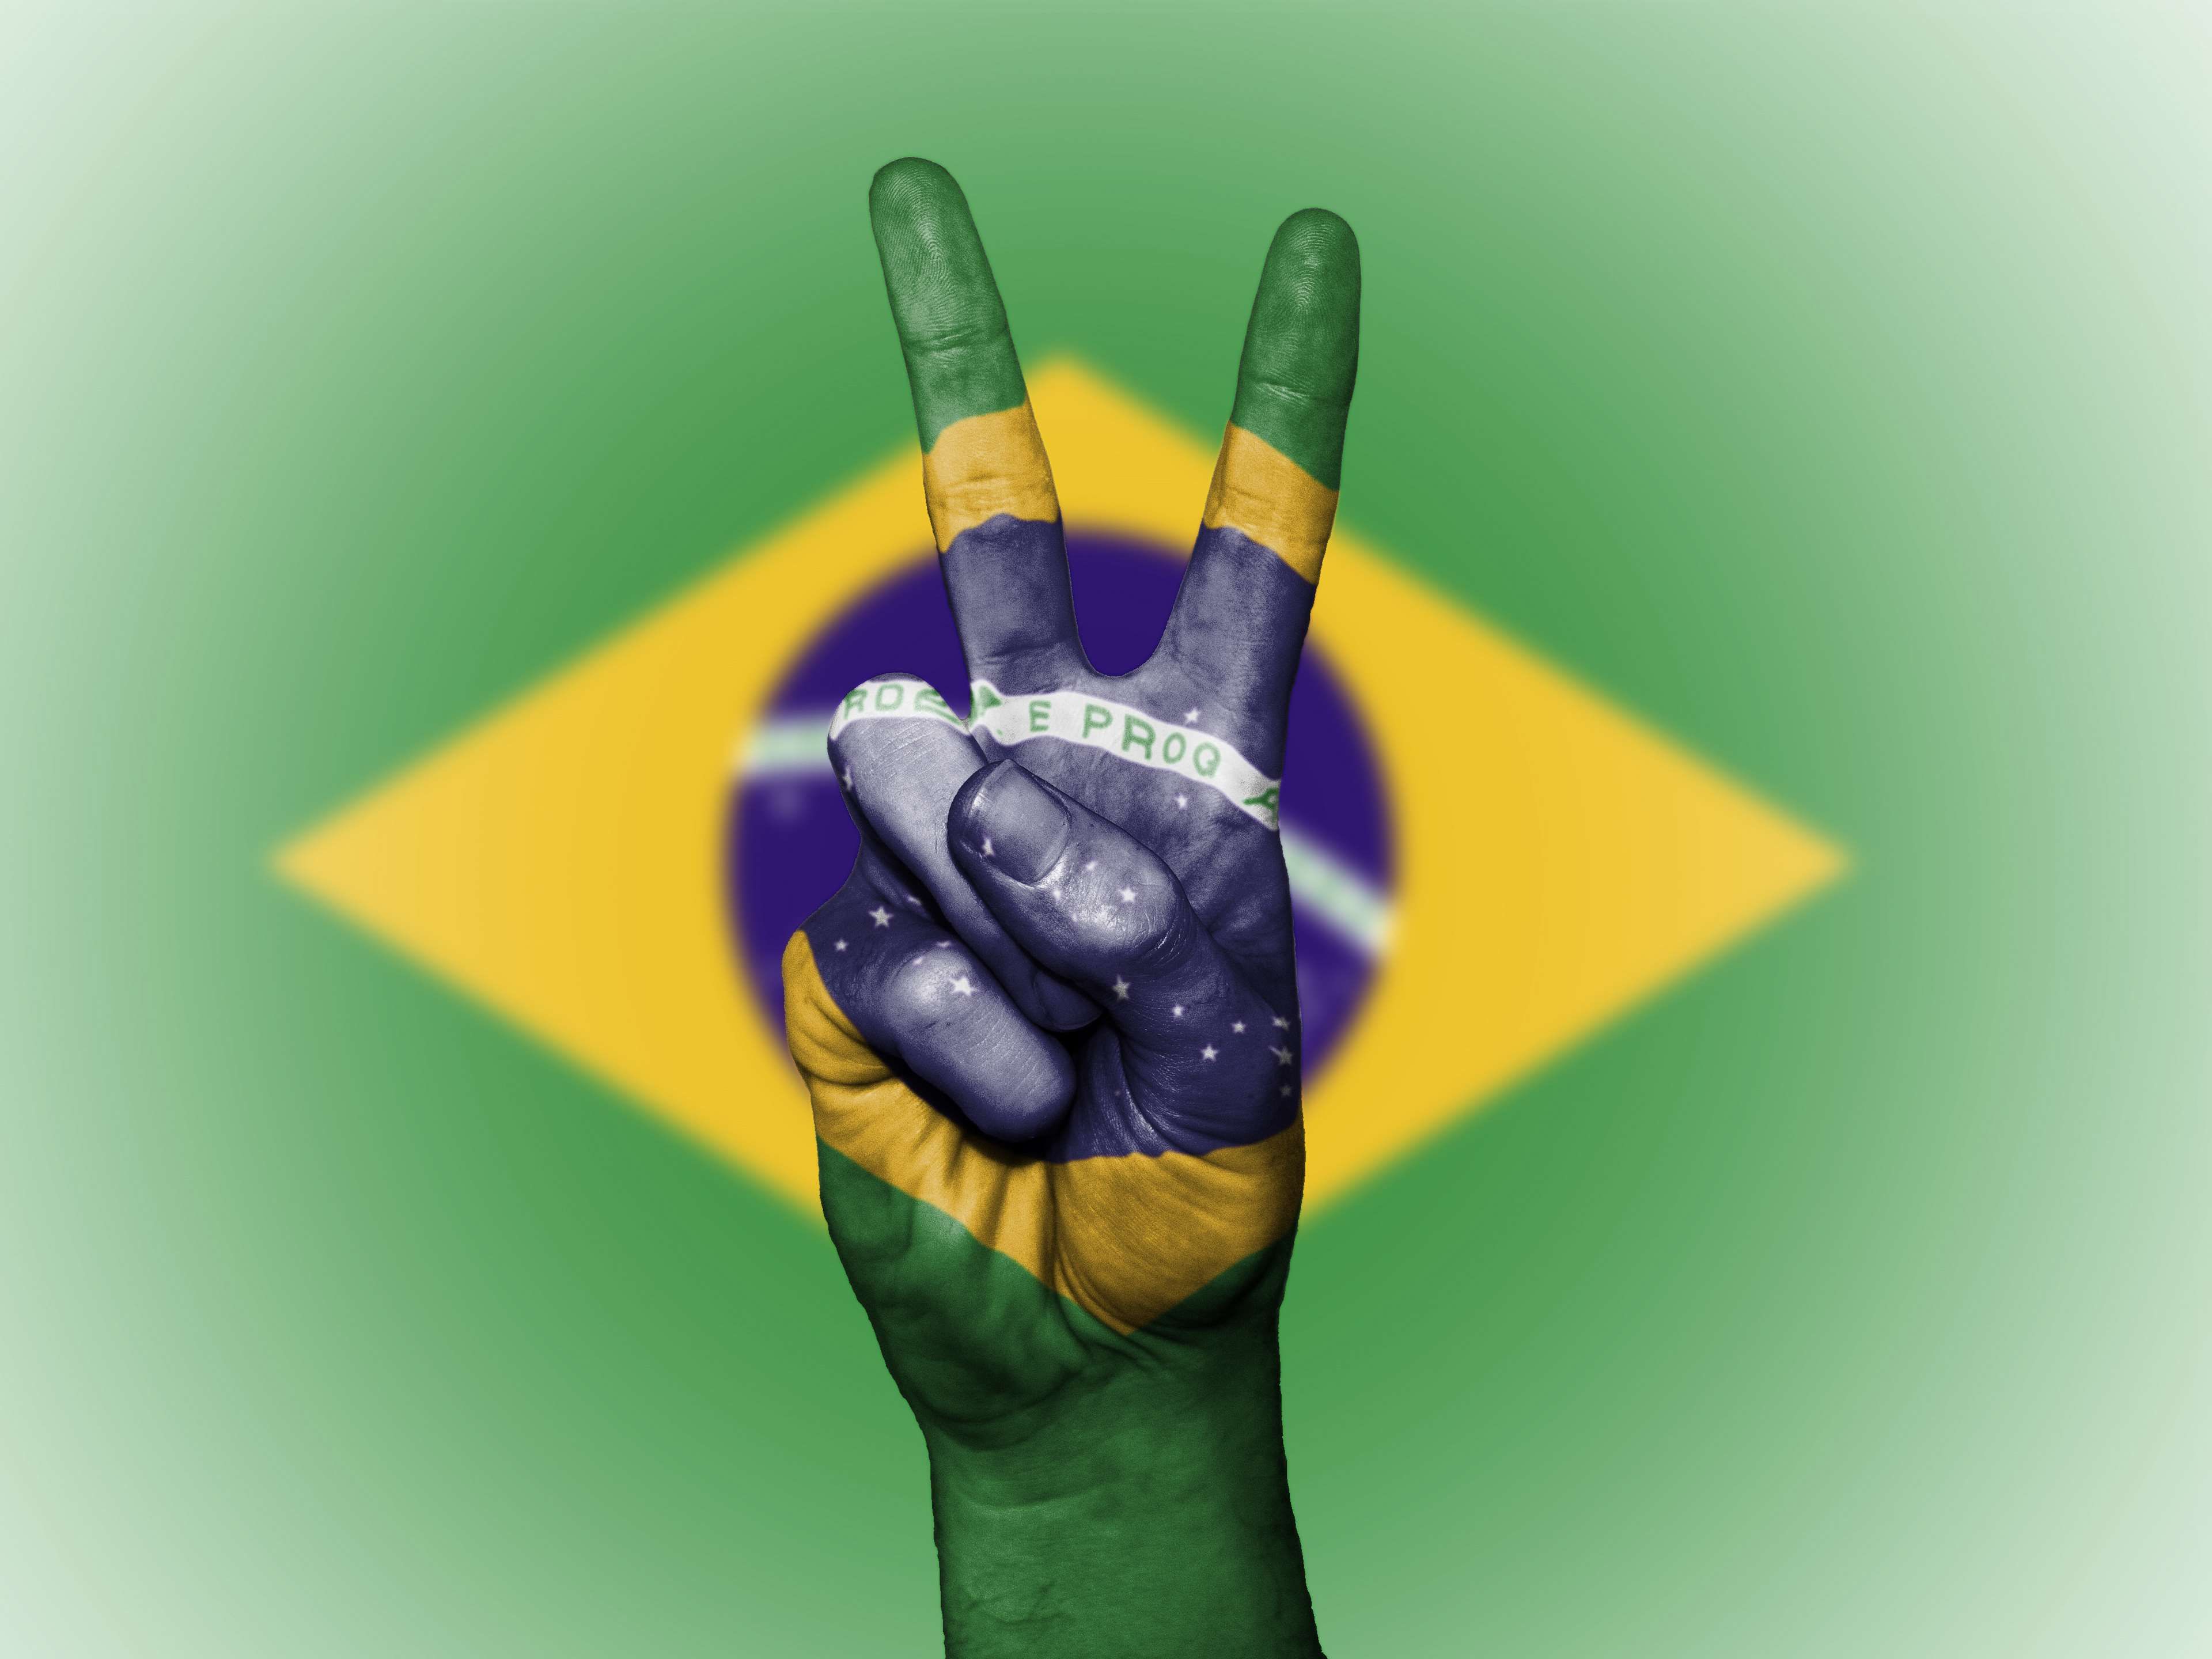 background, banner, brazil, colors, country, ensign, flag, free, free image, free , graphic, hand, icon, illustration, nation, national, peace, royalty free, state, symbol, tourism, travel 4k wallpaper